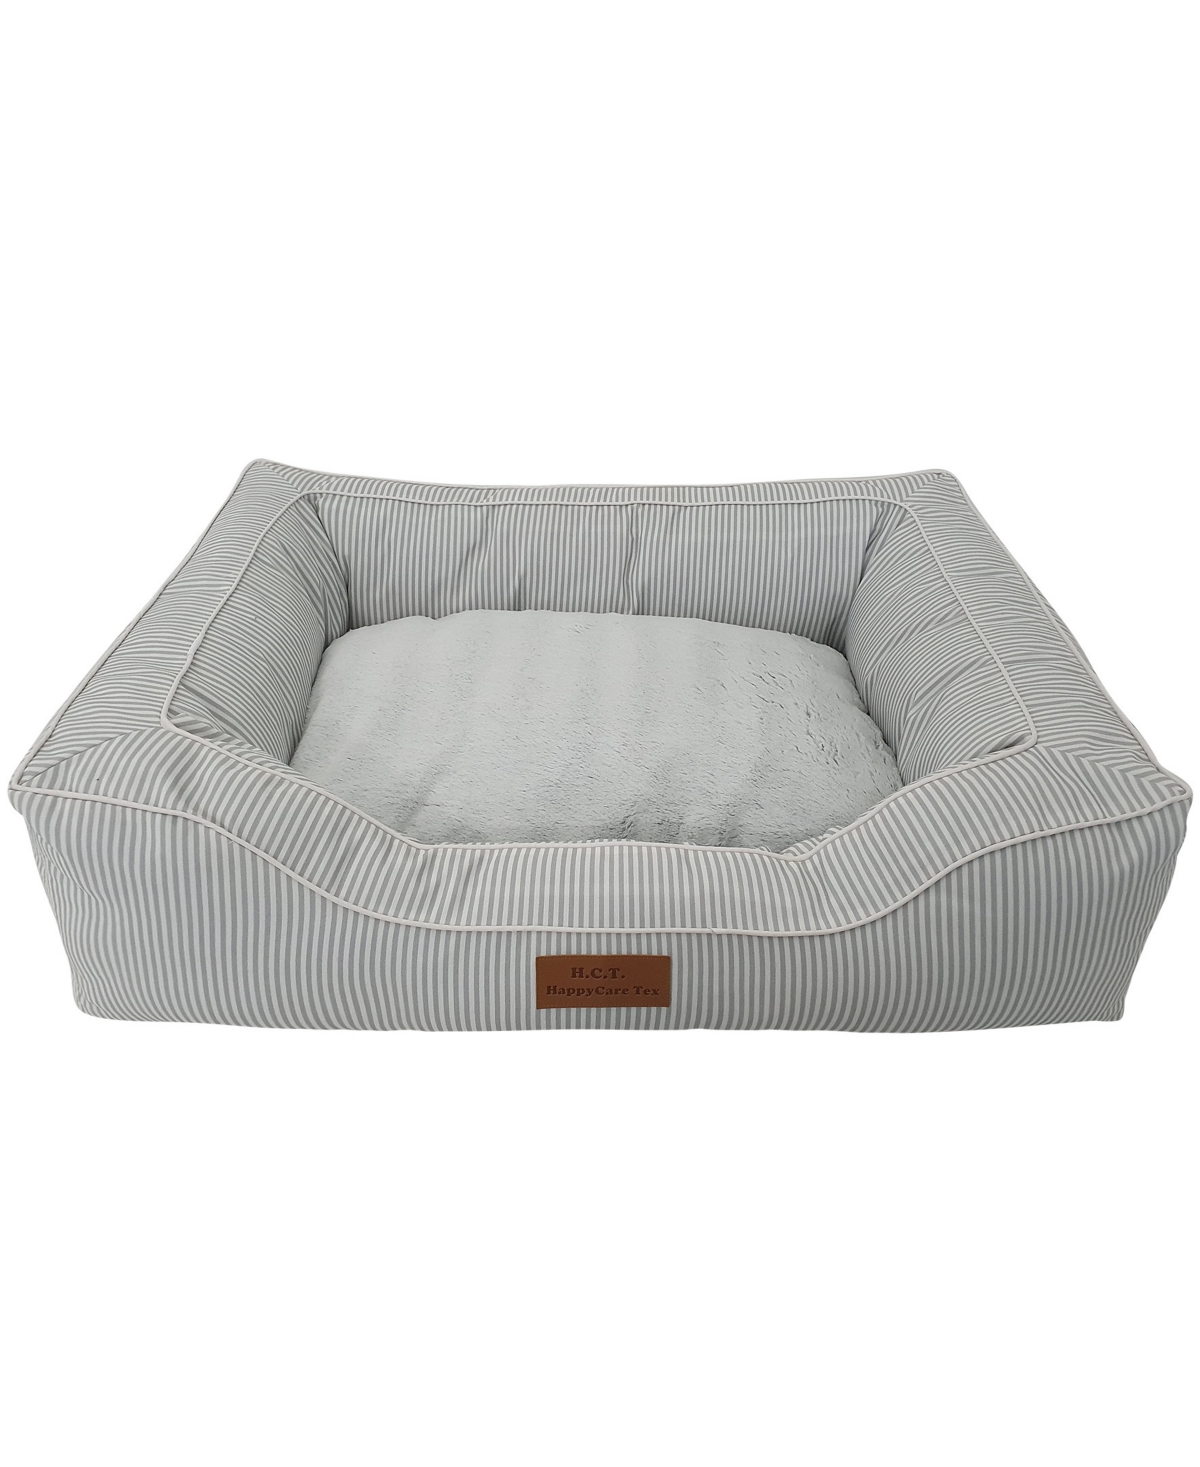 Canvas Rectangle Pet Bed, Large - Stripe Gray